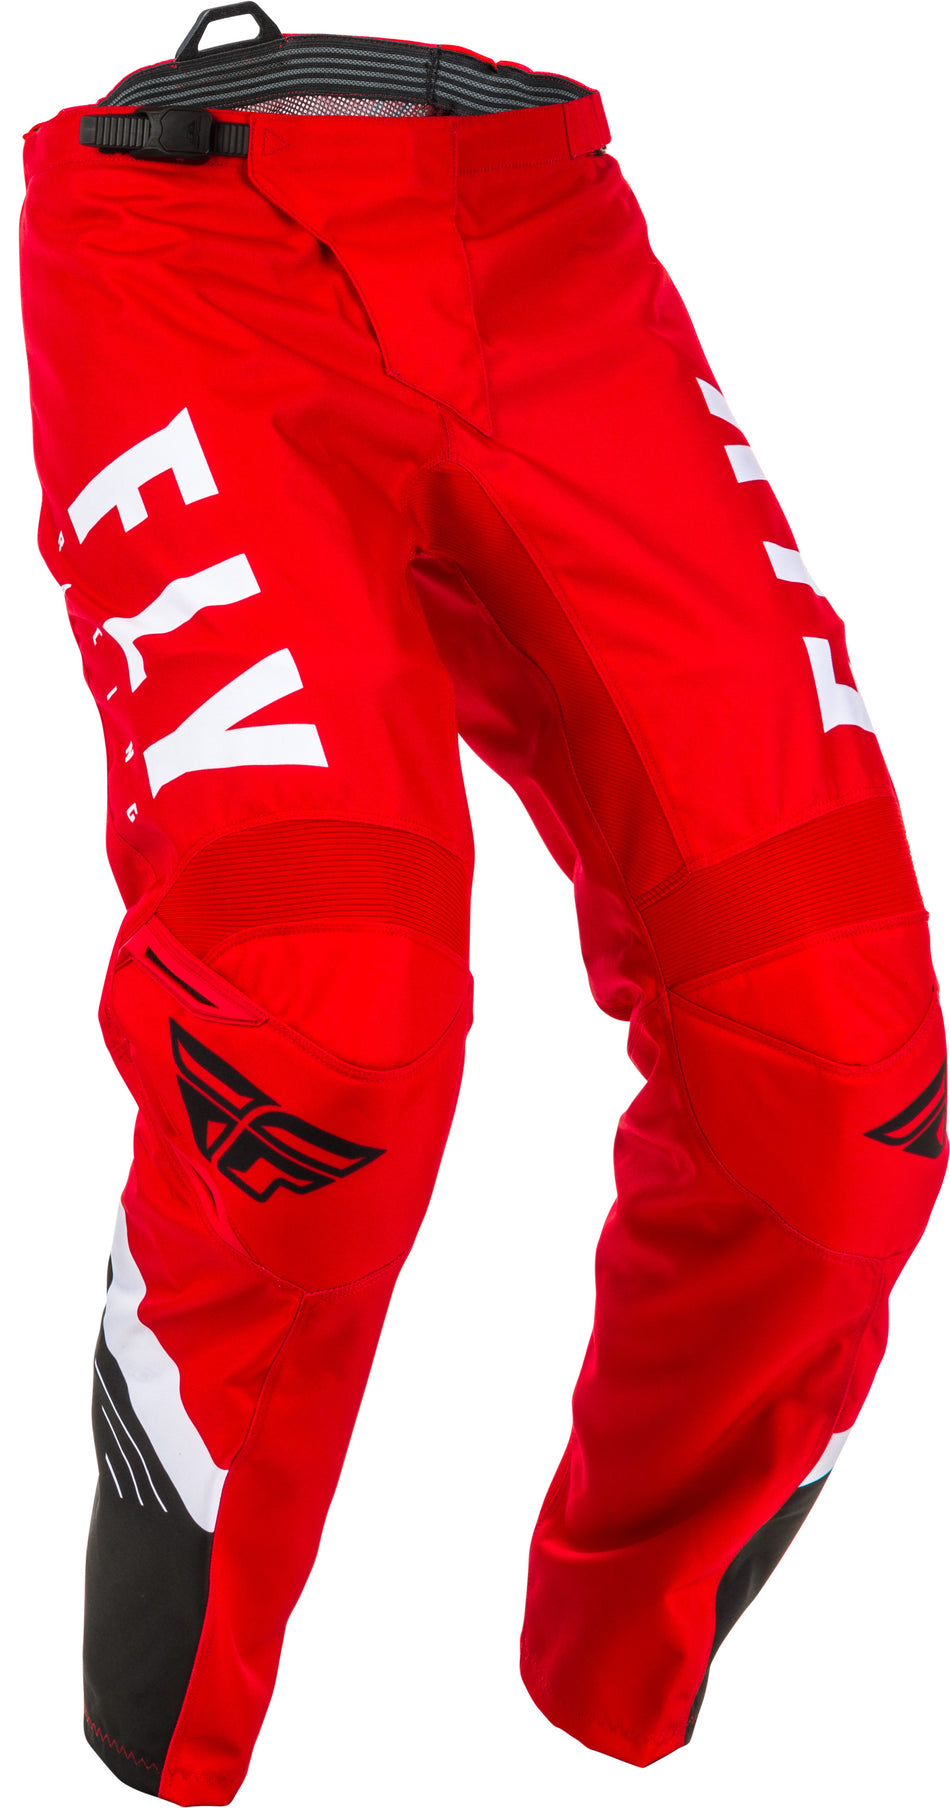 FLY RACING F-16 Pants Red/Black/White Sz 24 373-93324